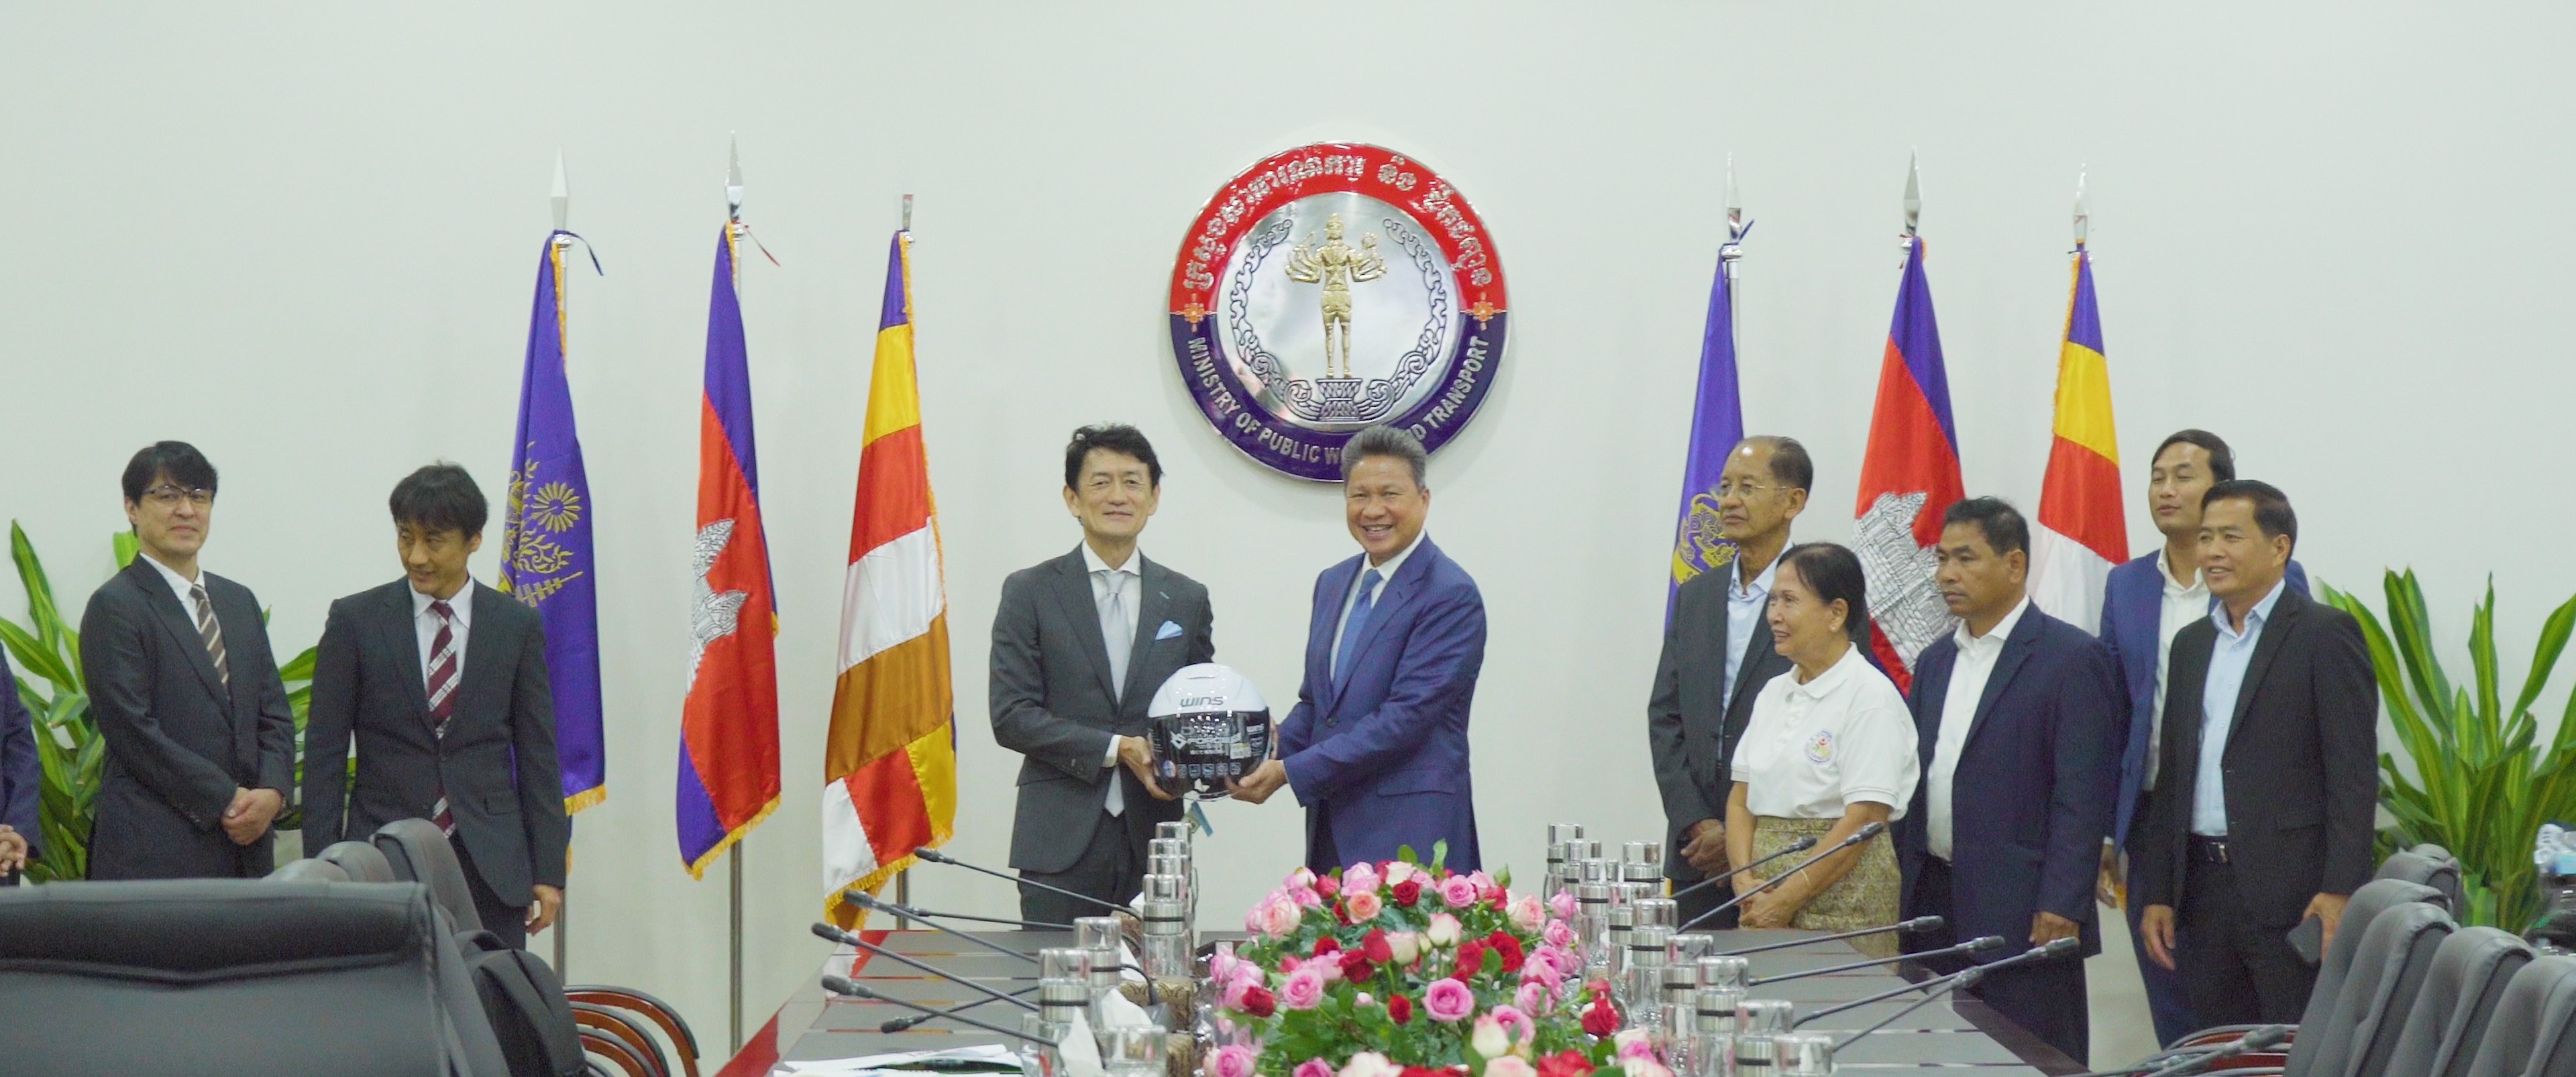 Helmets Donation to Motorcycle Users in Cambodia through the Ministry of Public Works and Transport​